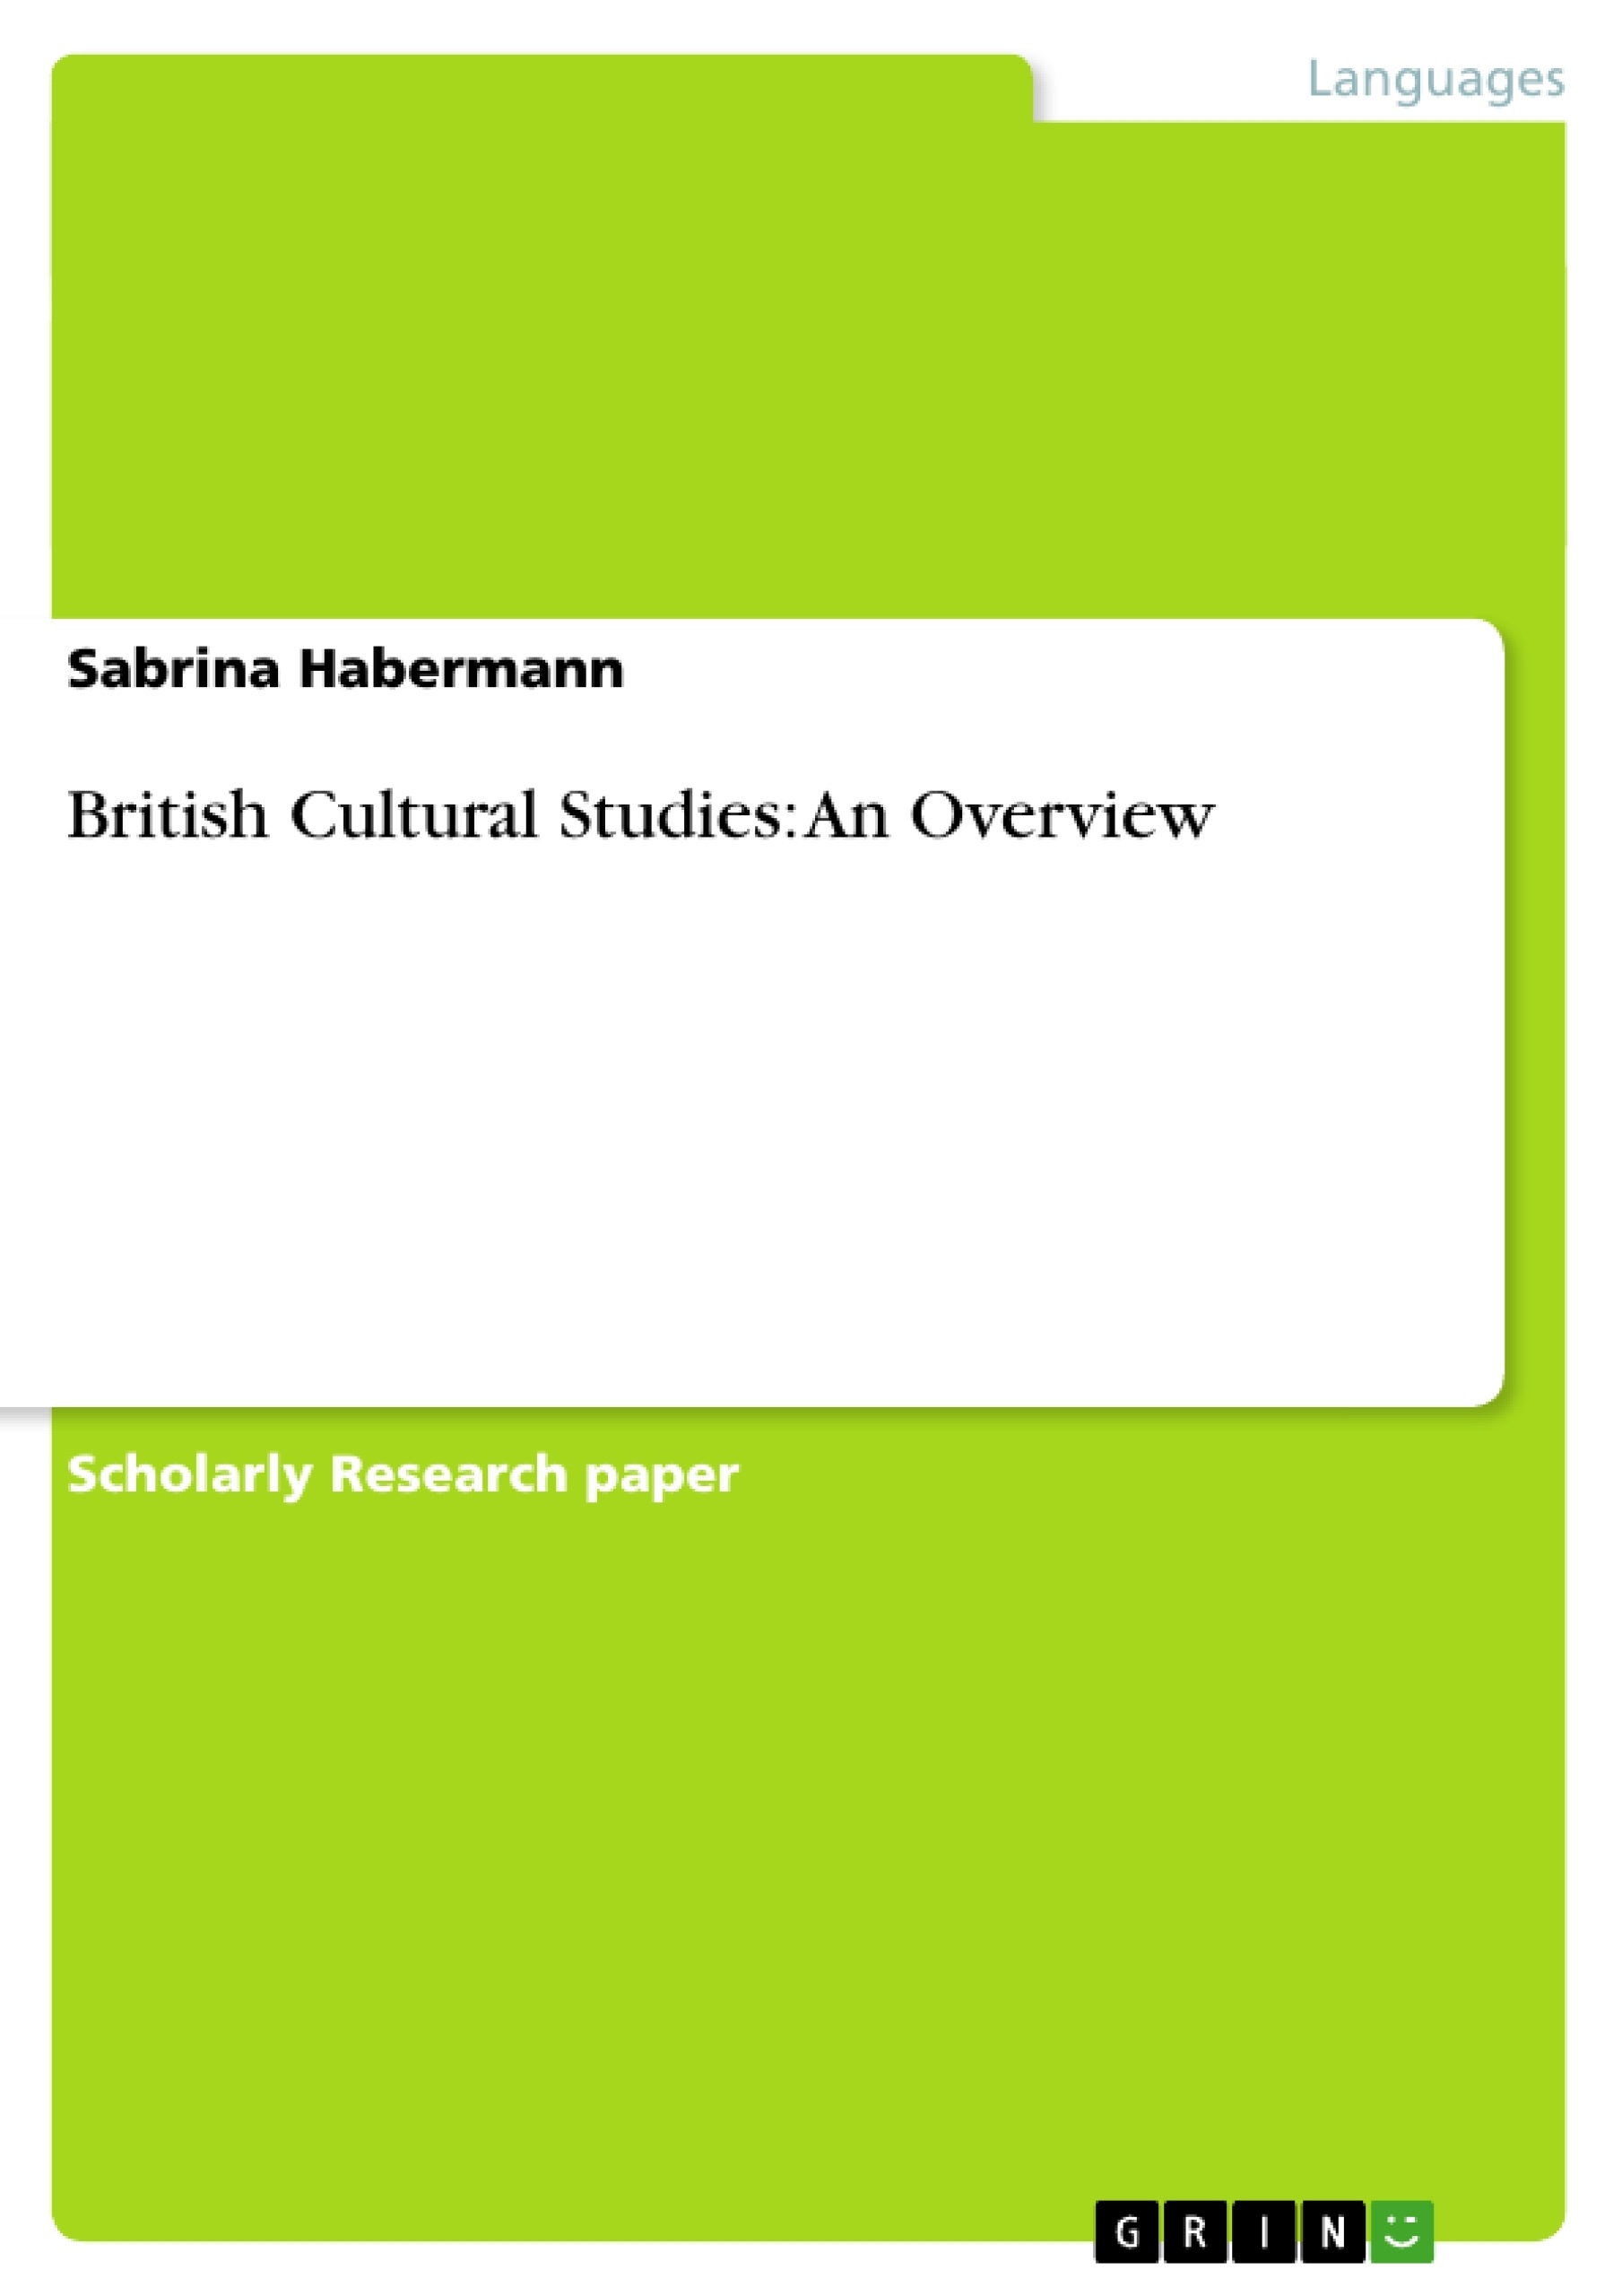 Title: British Cultural Studies: An Overview